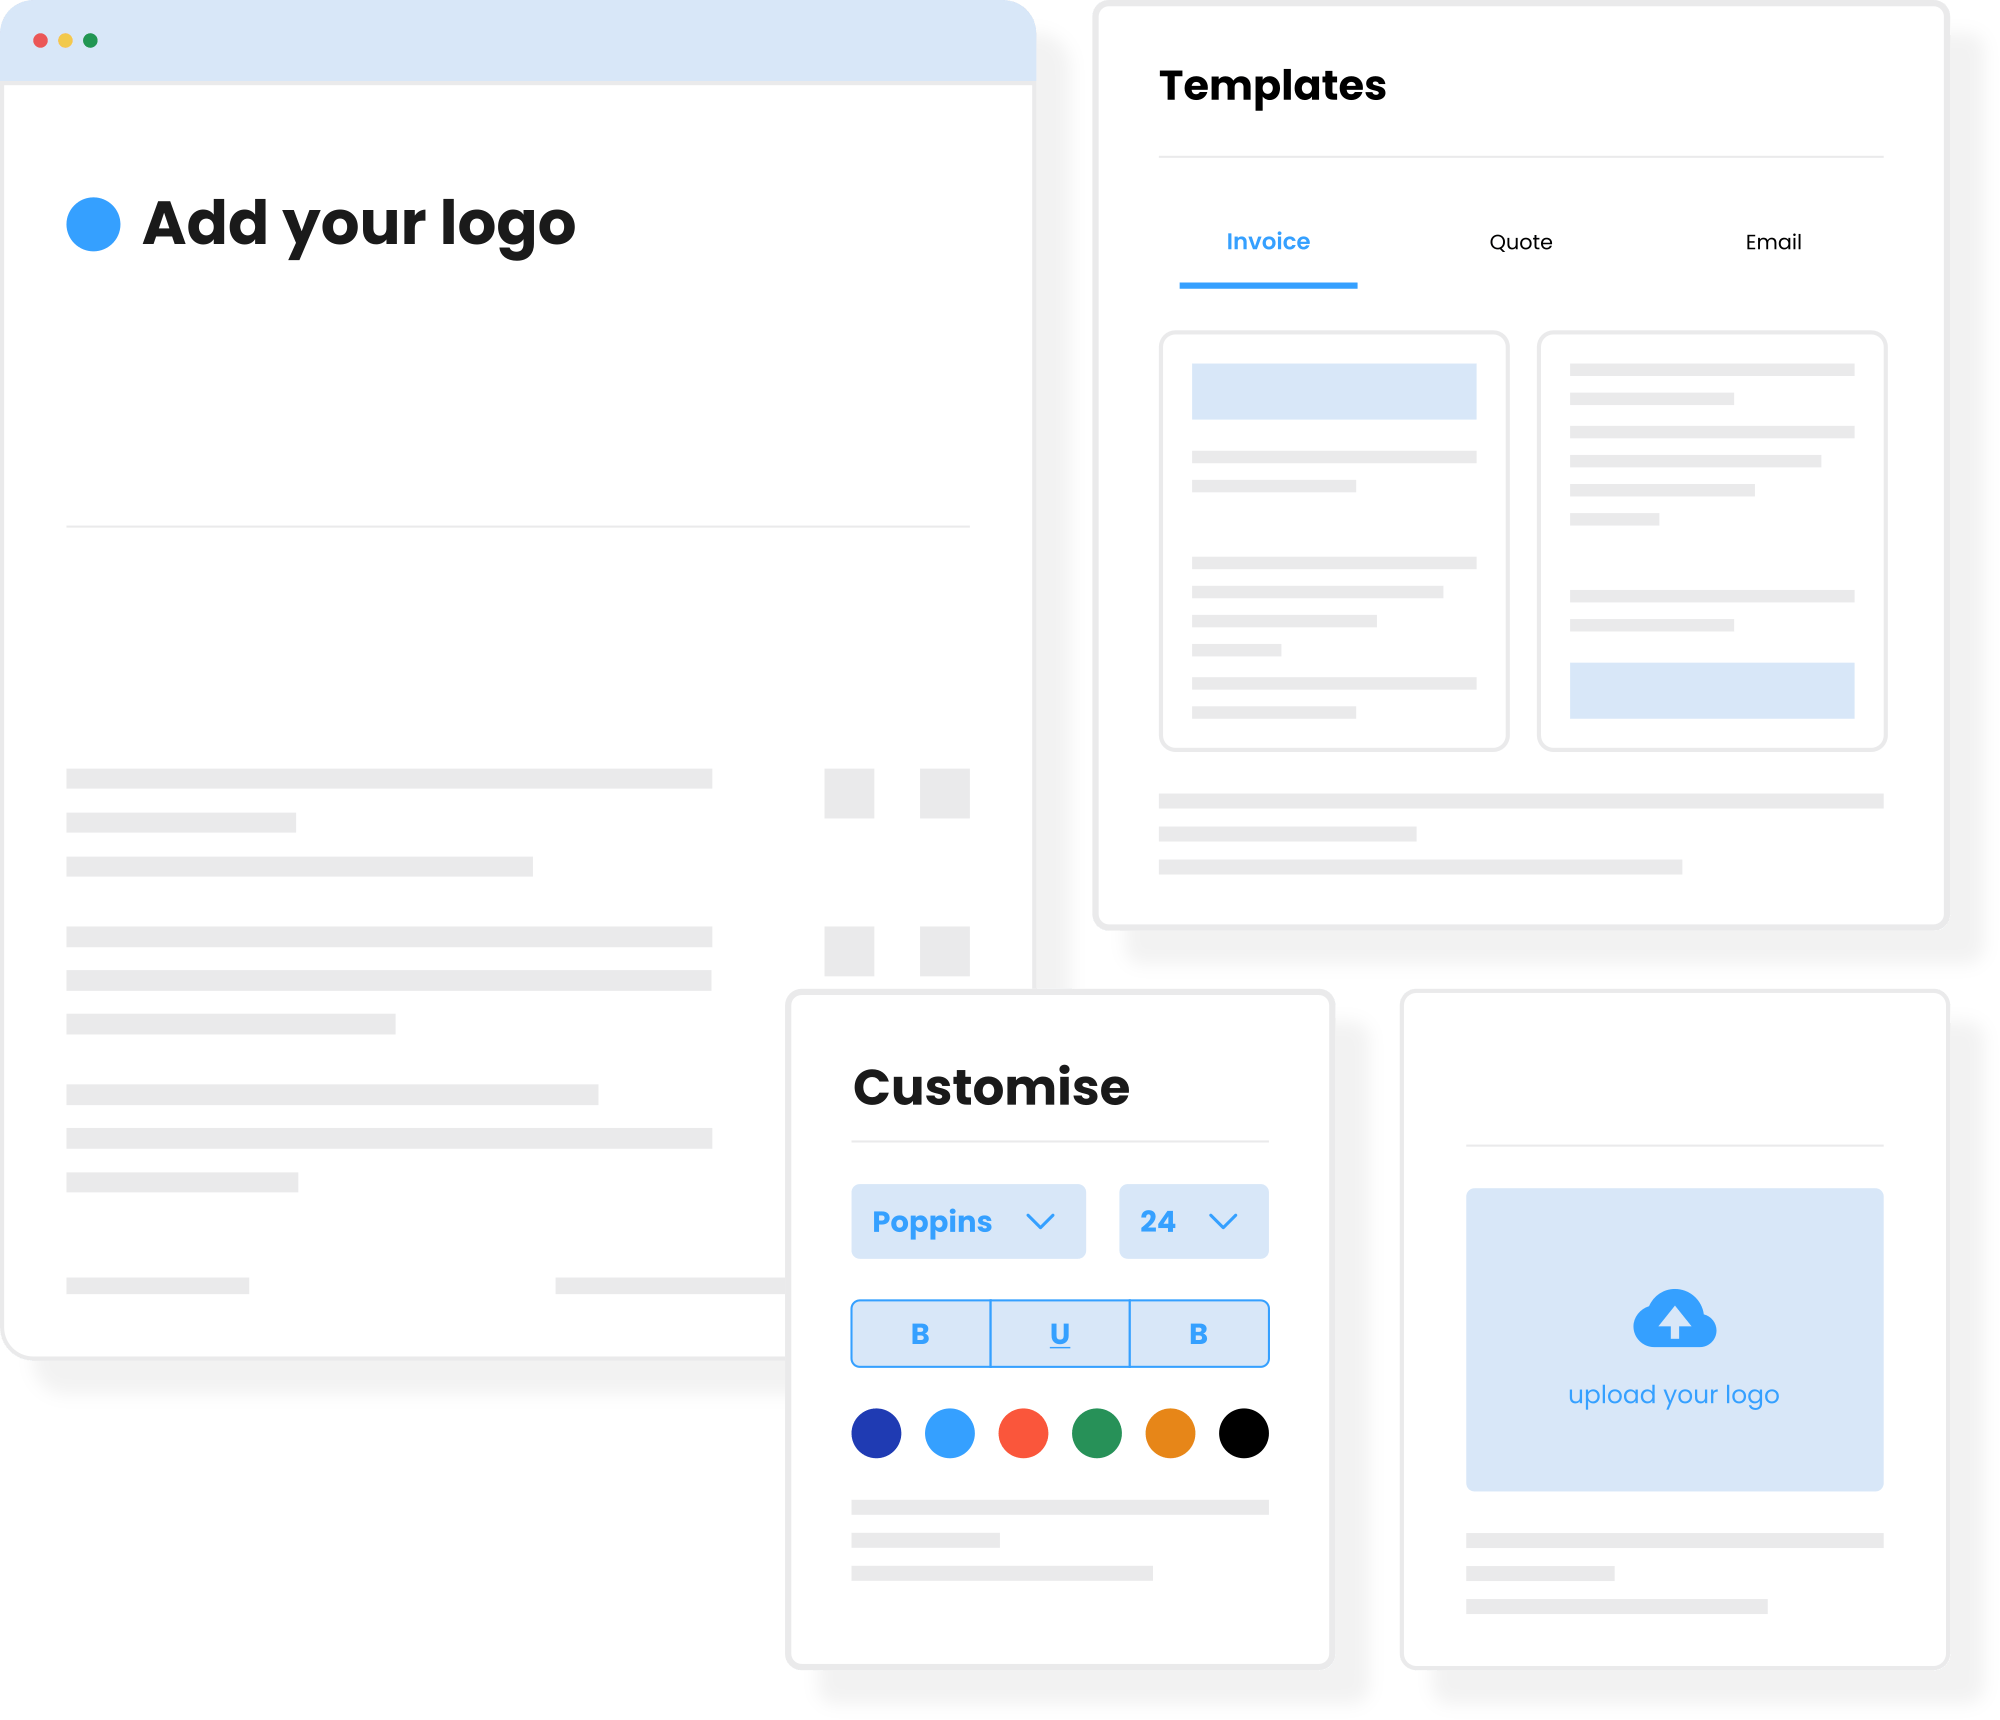 Customise forms with your logo so they look professional